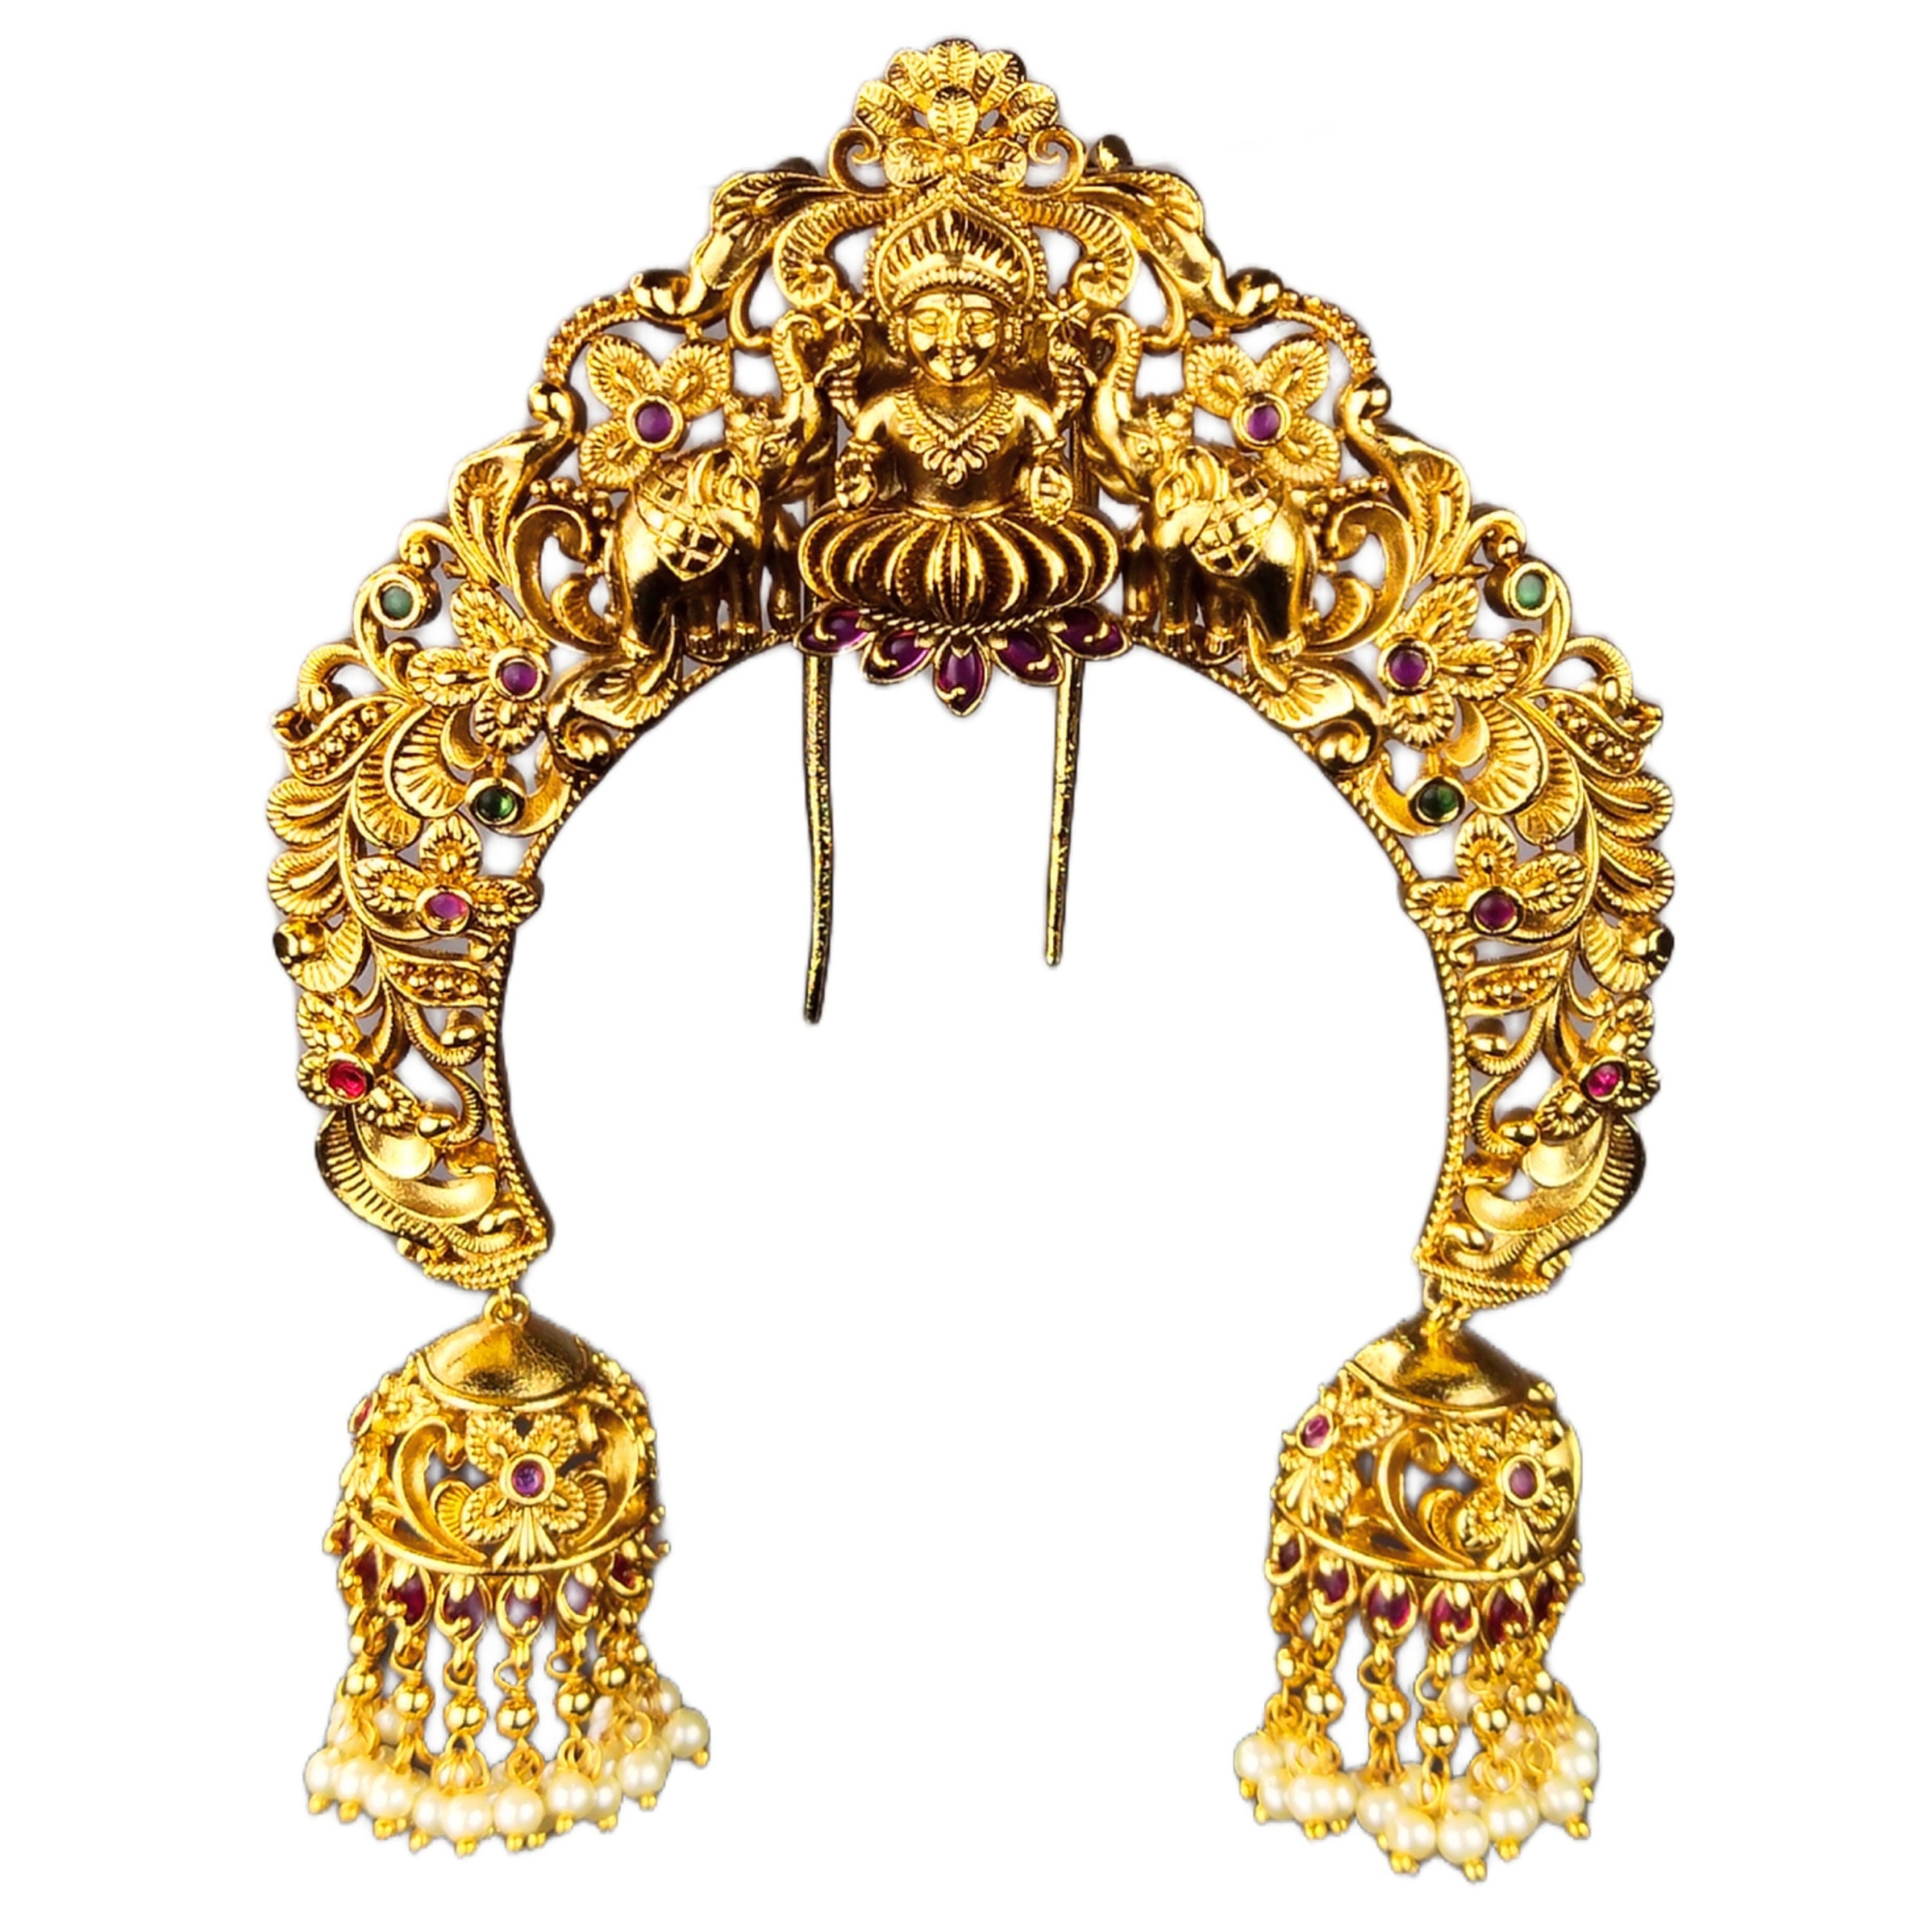 New Style Wedding Hair Accessories/Hair Pins/Juda Pins for Women GOLD Hair  Pin Price in India - Buy New Style Wedding Hair Accessories/Hair Pins/Juda  Pins for Women GOLD Hair Pin online at Flipkart.com